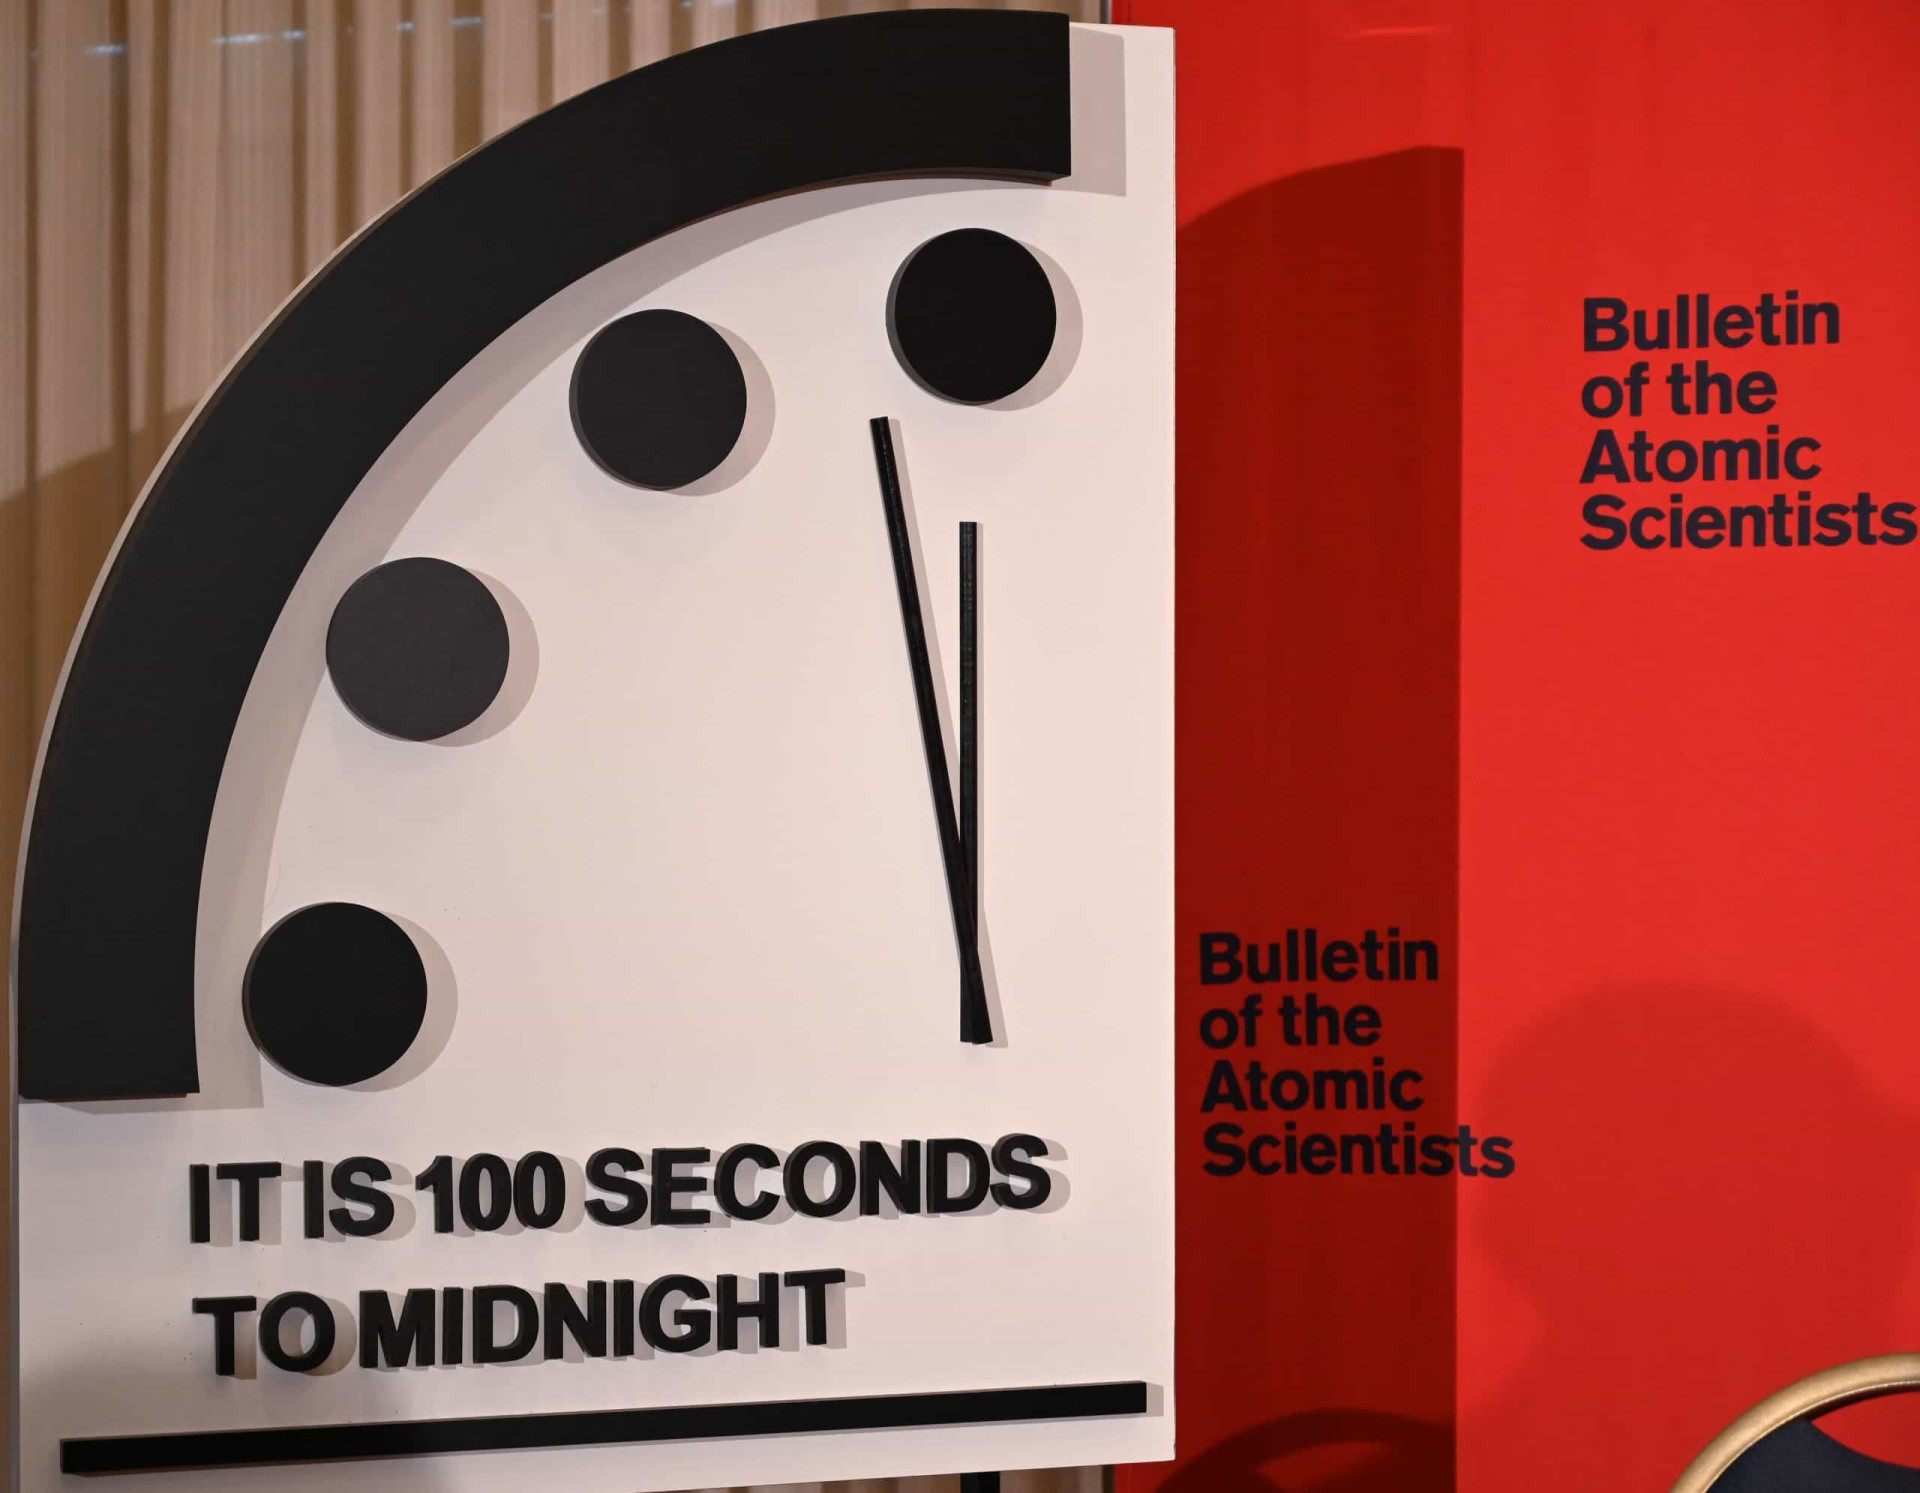 <p>In 2020, the unit of time was announced in seconds (100) to emphasize "the most dangerous situation that humanity has ever faced," according to the Bulletin of the Atomic Scientists.</p><p><a href="https://www.msn.com/en-ca/community/channel/vid-7xx8mnucu55yw63we9va2gwr7uihbxwc68fxqp25x6tg4ftibpra?cvid=94631541bc0f4f89bfd59158d696ad7e">Follow us and access great exclusive content every day</a></p>